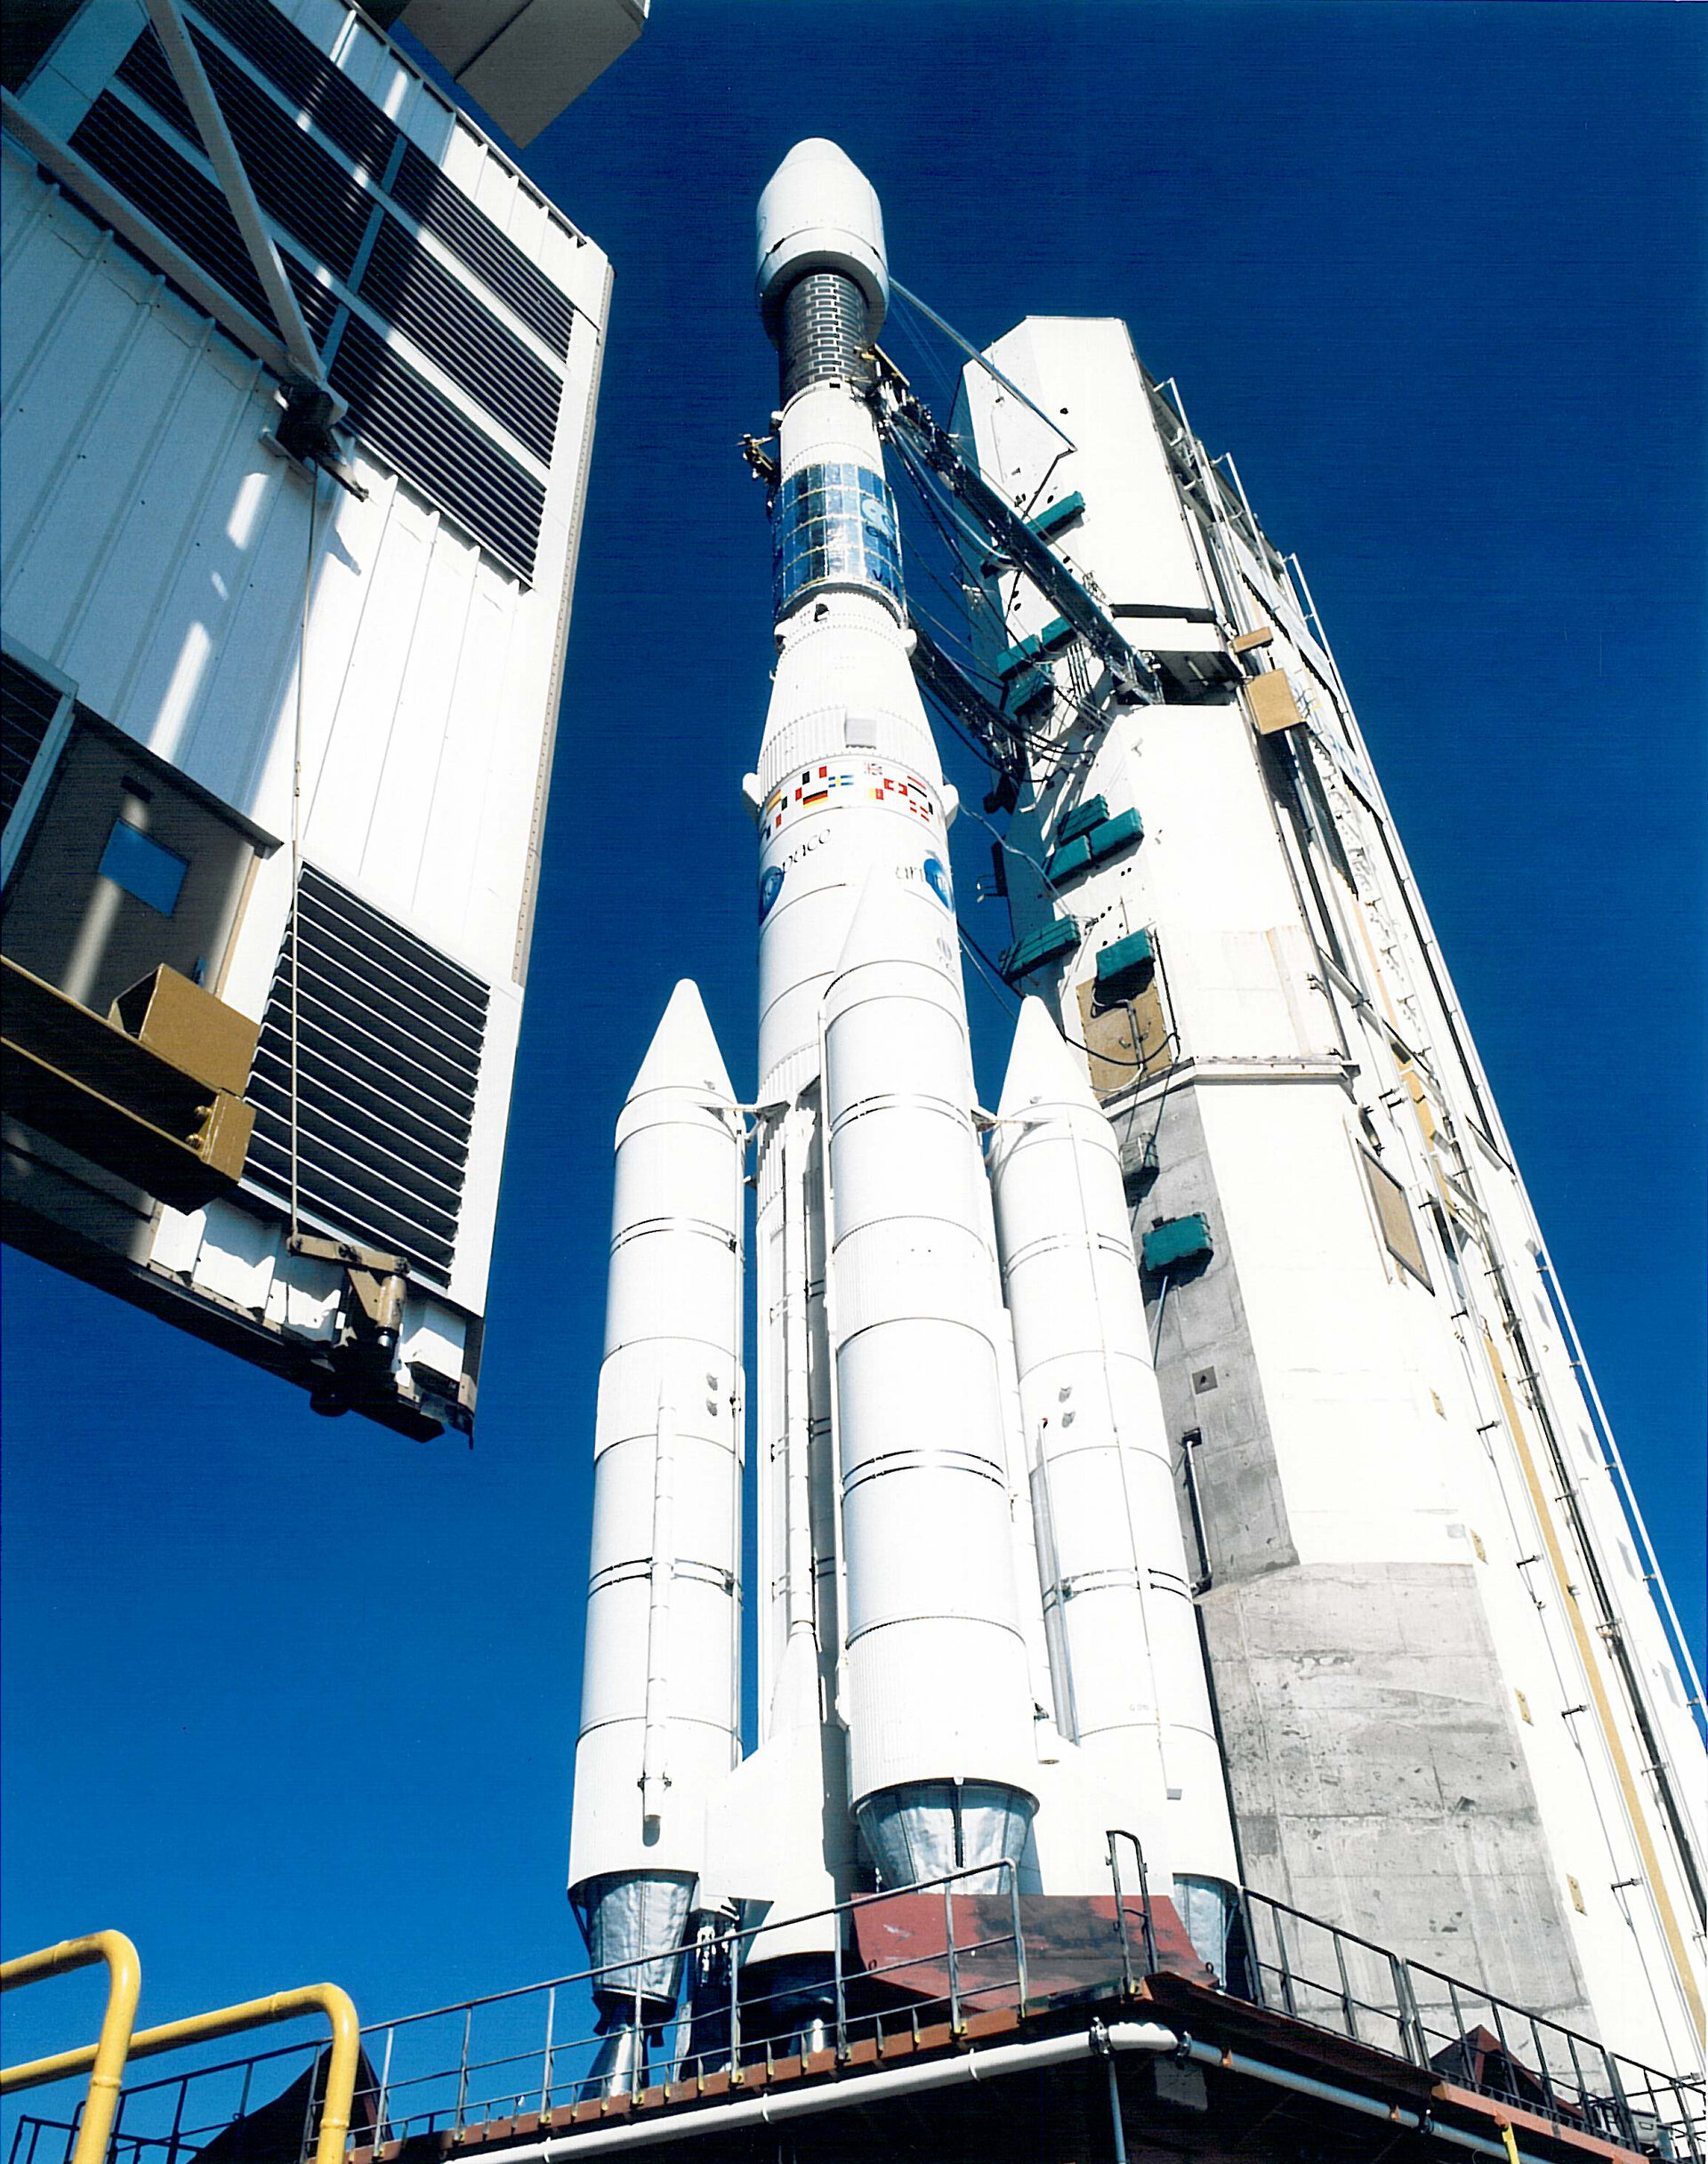 An Ariane 4 (44L) on the launchpad, 1989